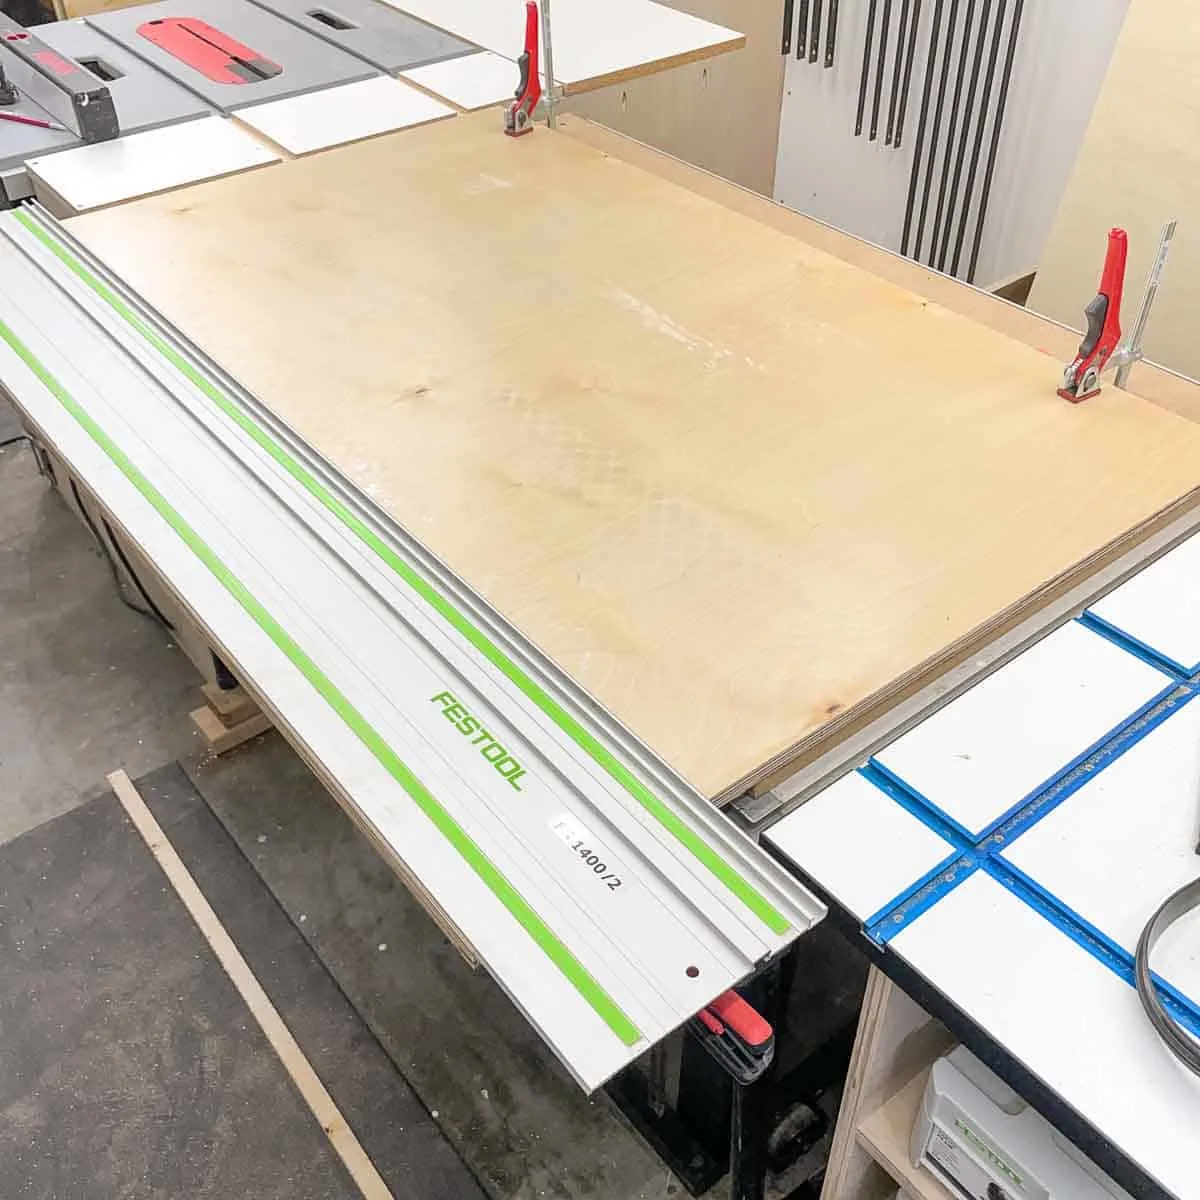 trimming plywood for wall cabinets with a track saw on a workbench